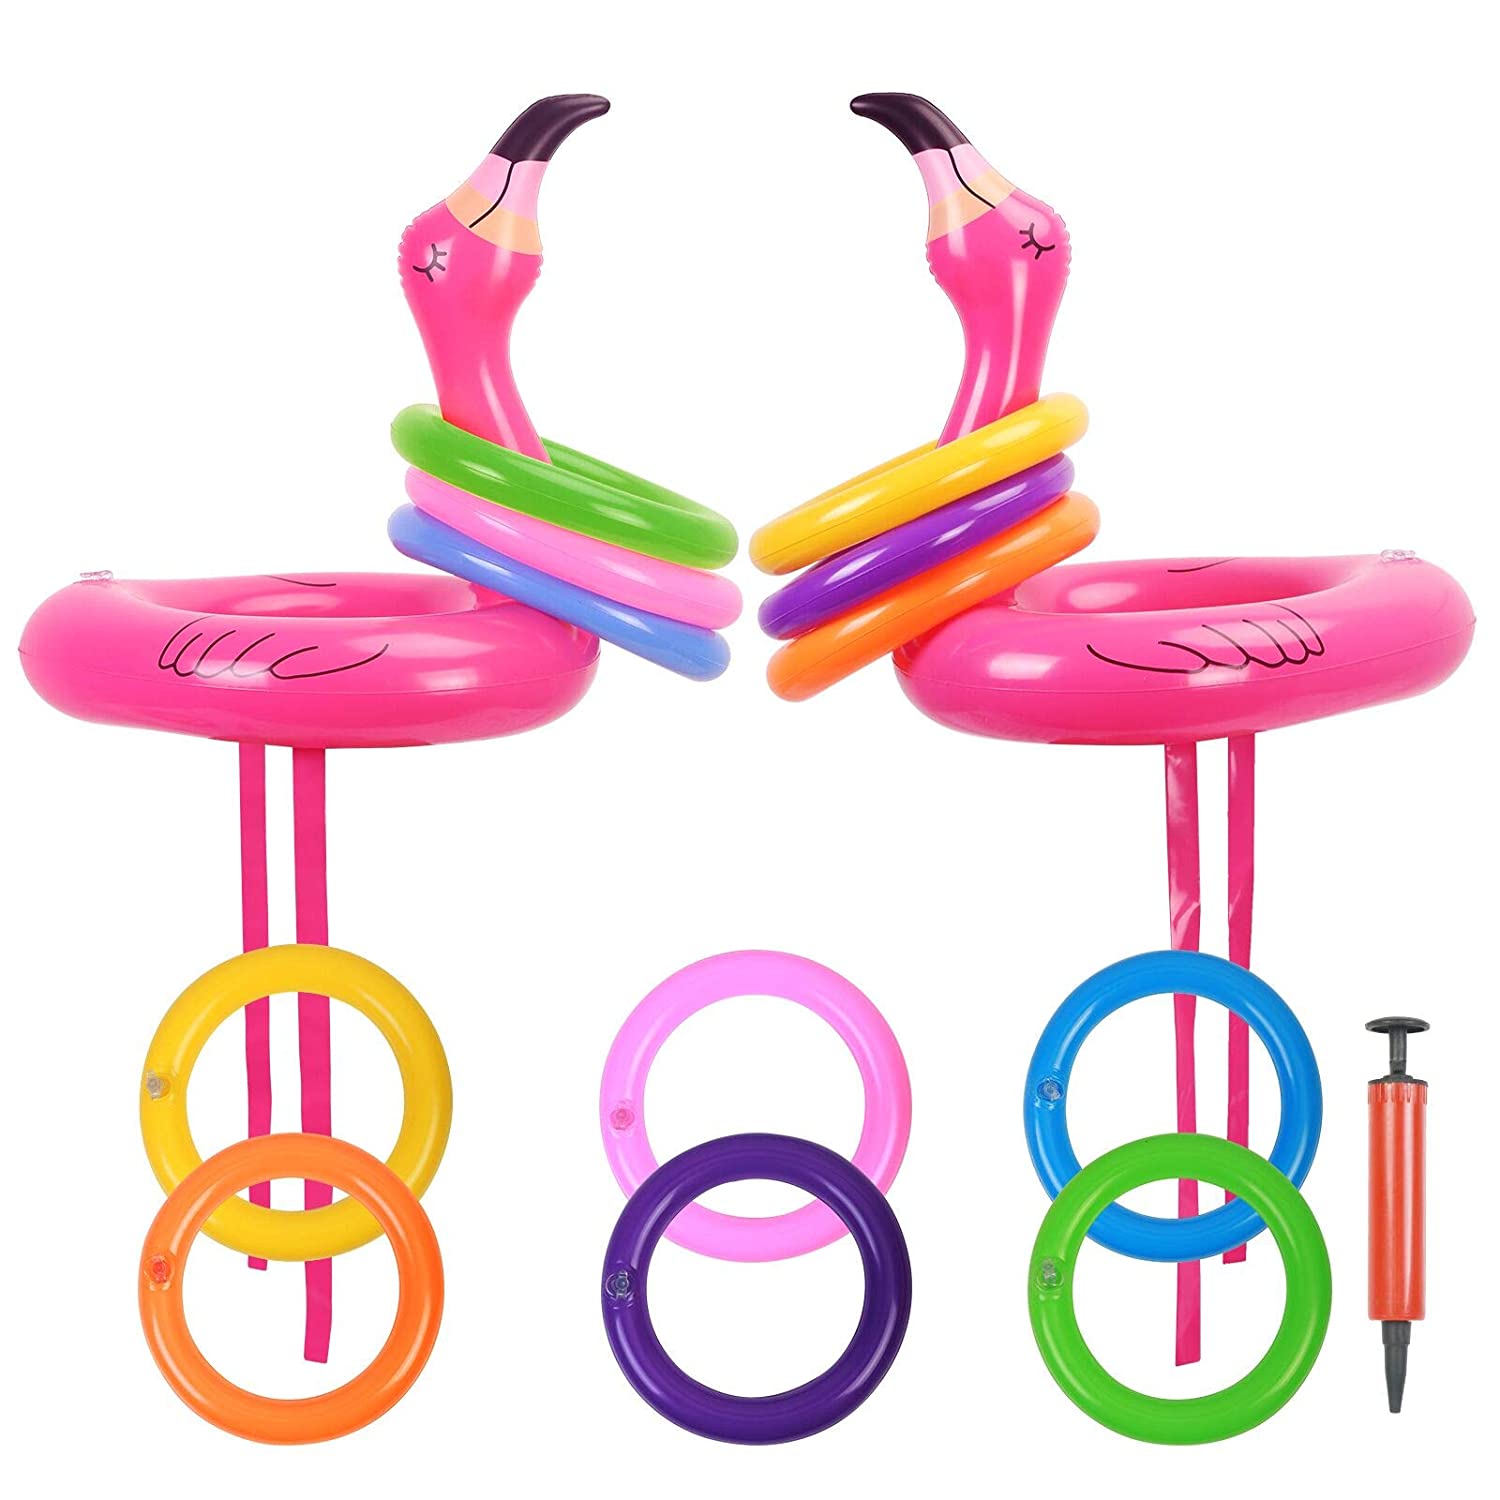 KATOOM Inflatable Flamingo Ring Toss Game 2 Pcs Inflatable Flamingo Hat Pool Toys Party Decoration with 12 pcs Floating Swimming Rings for Kids and Adult Family Party Game Water Fun